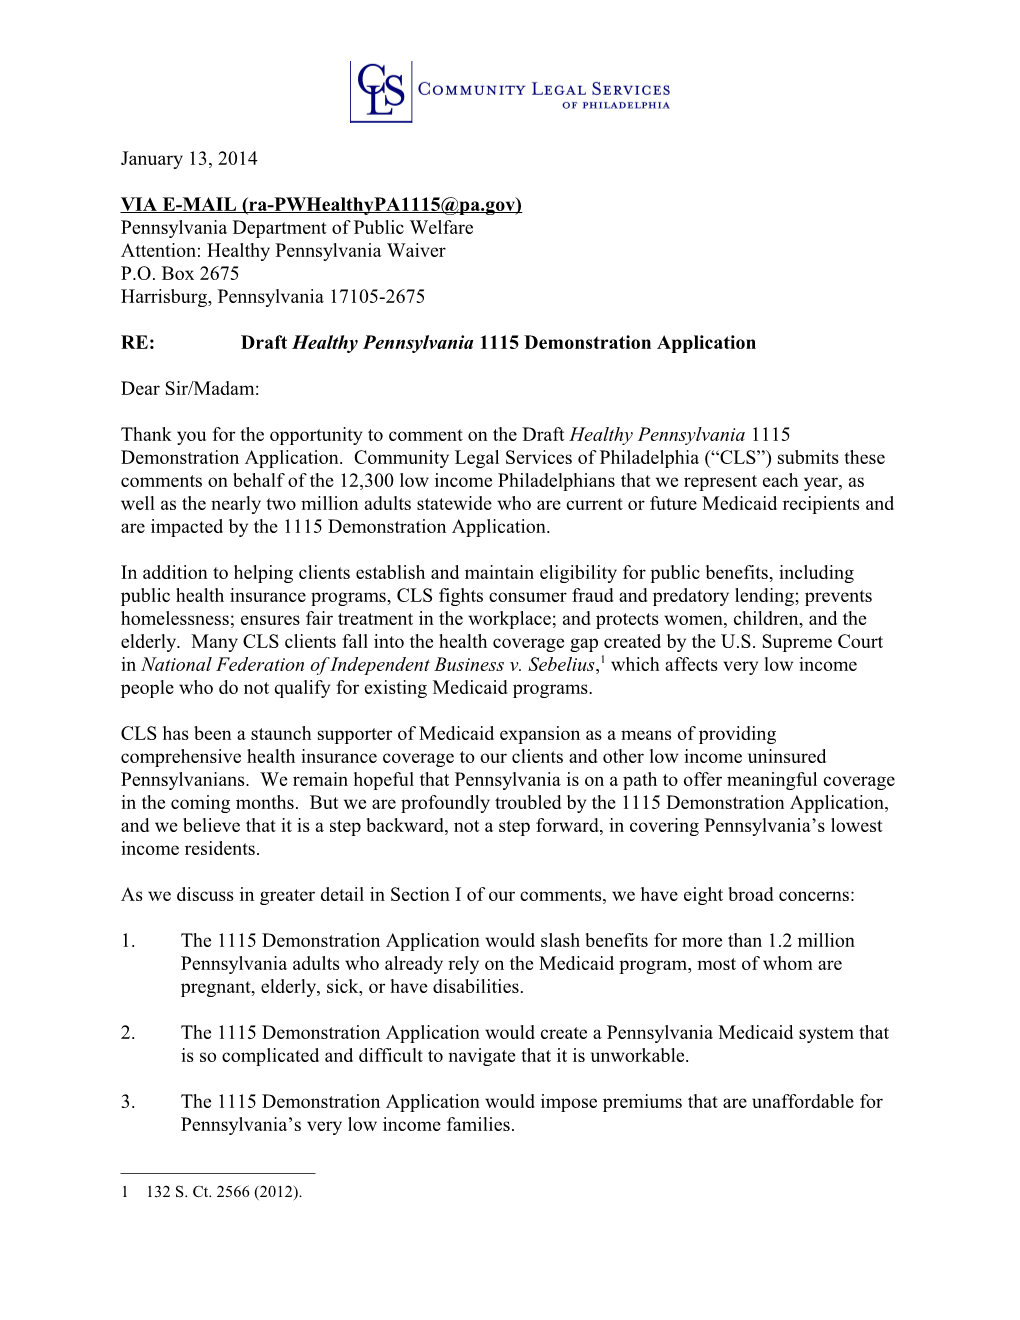 Comments Re: 1115 Demonstration Application Community Legal Services, Inc. Page 24 of 24